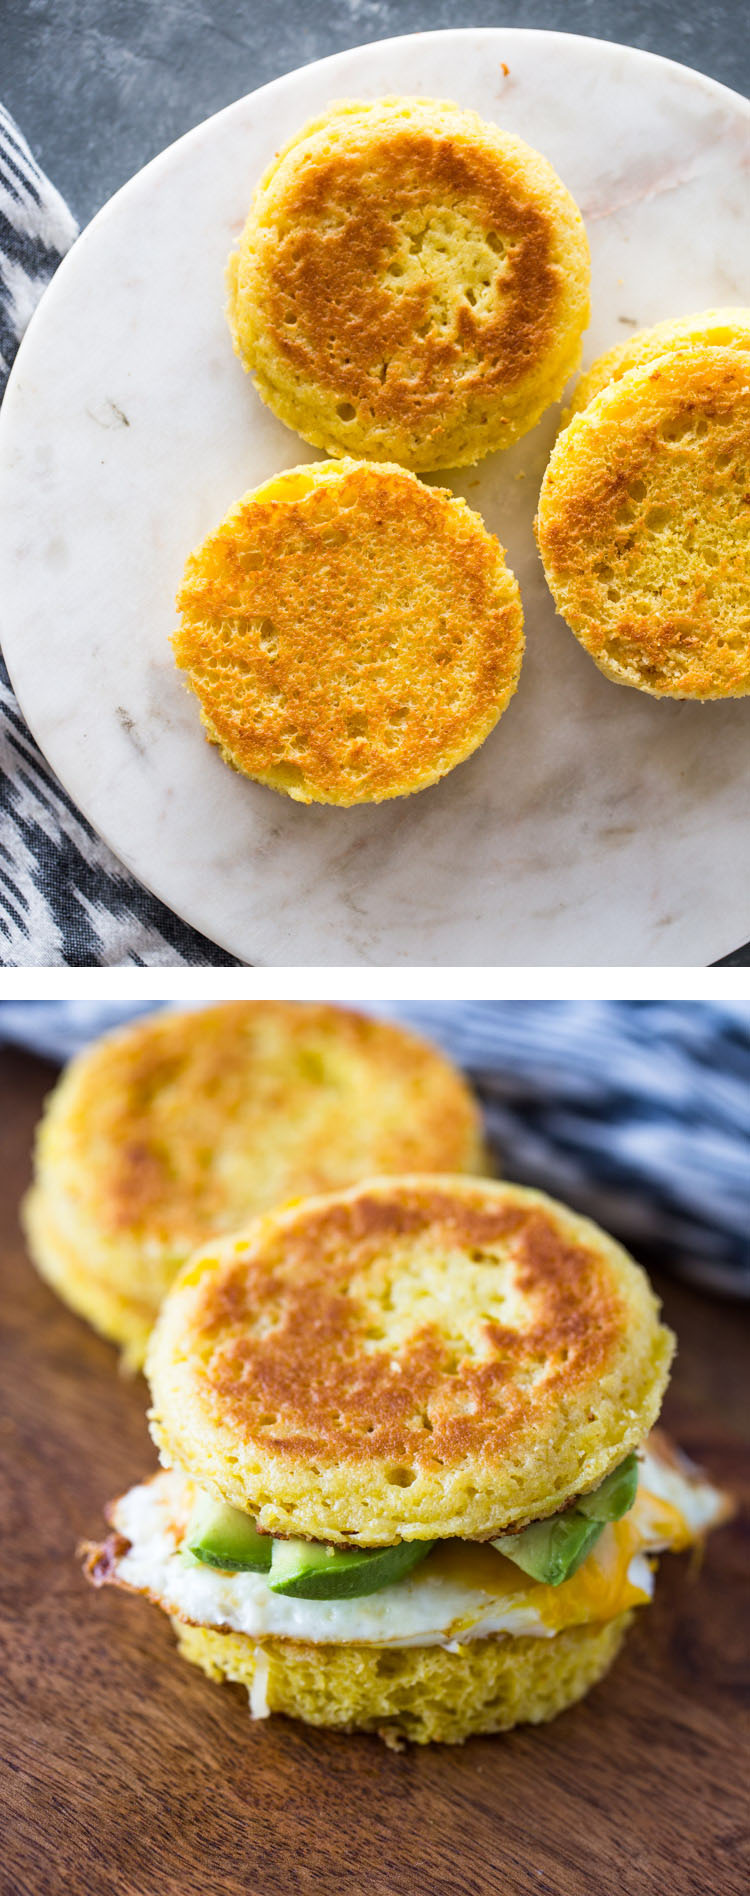 90 Second Microwavable Low Carb Keto Bread